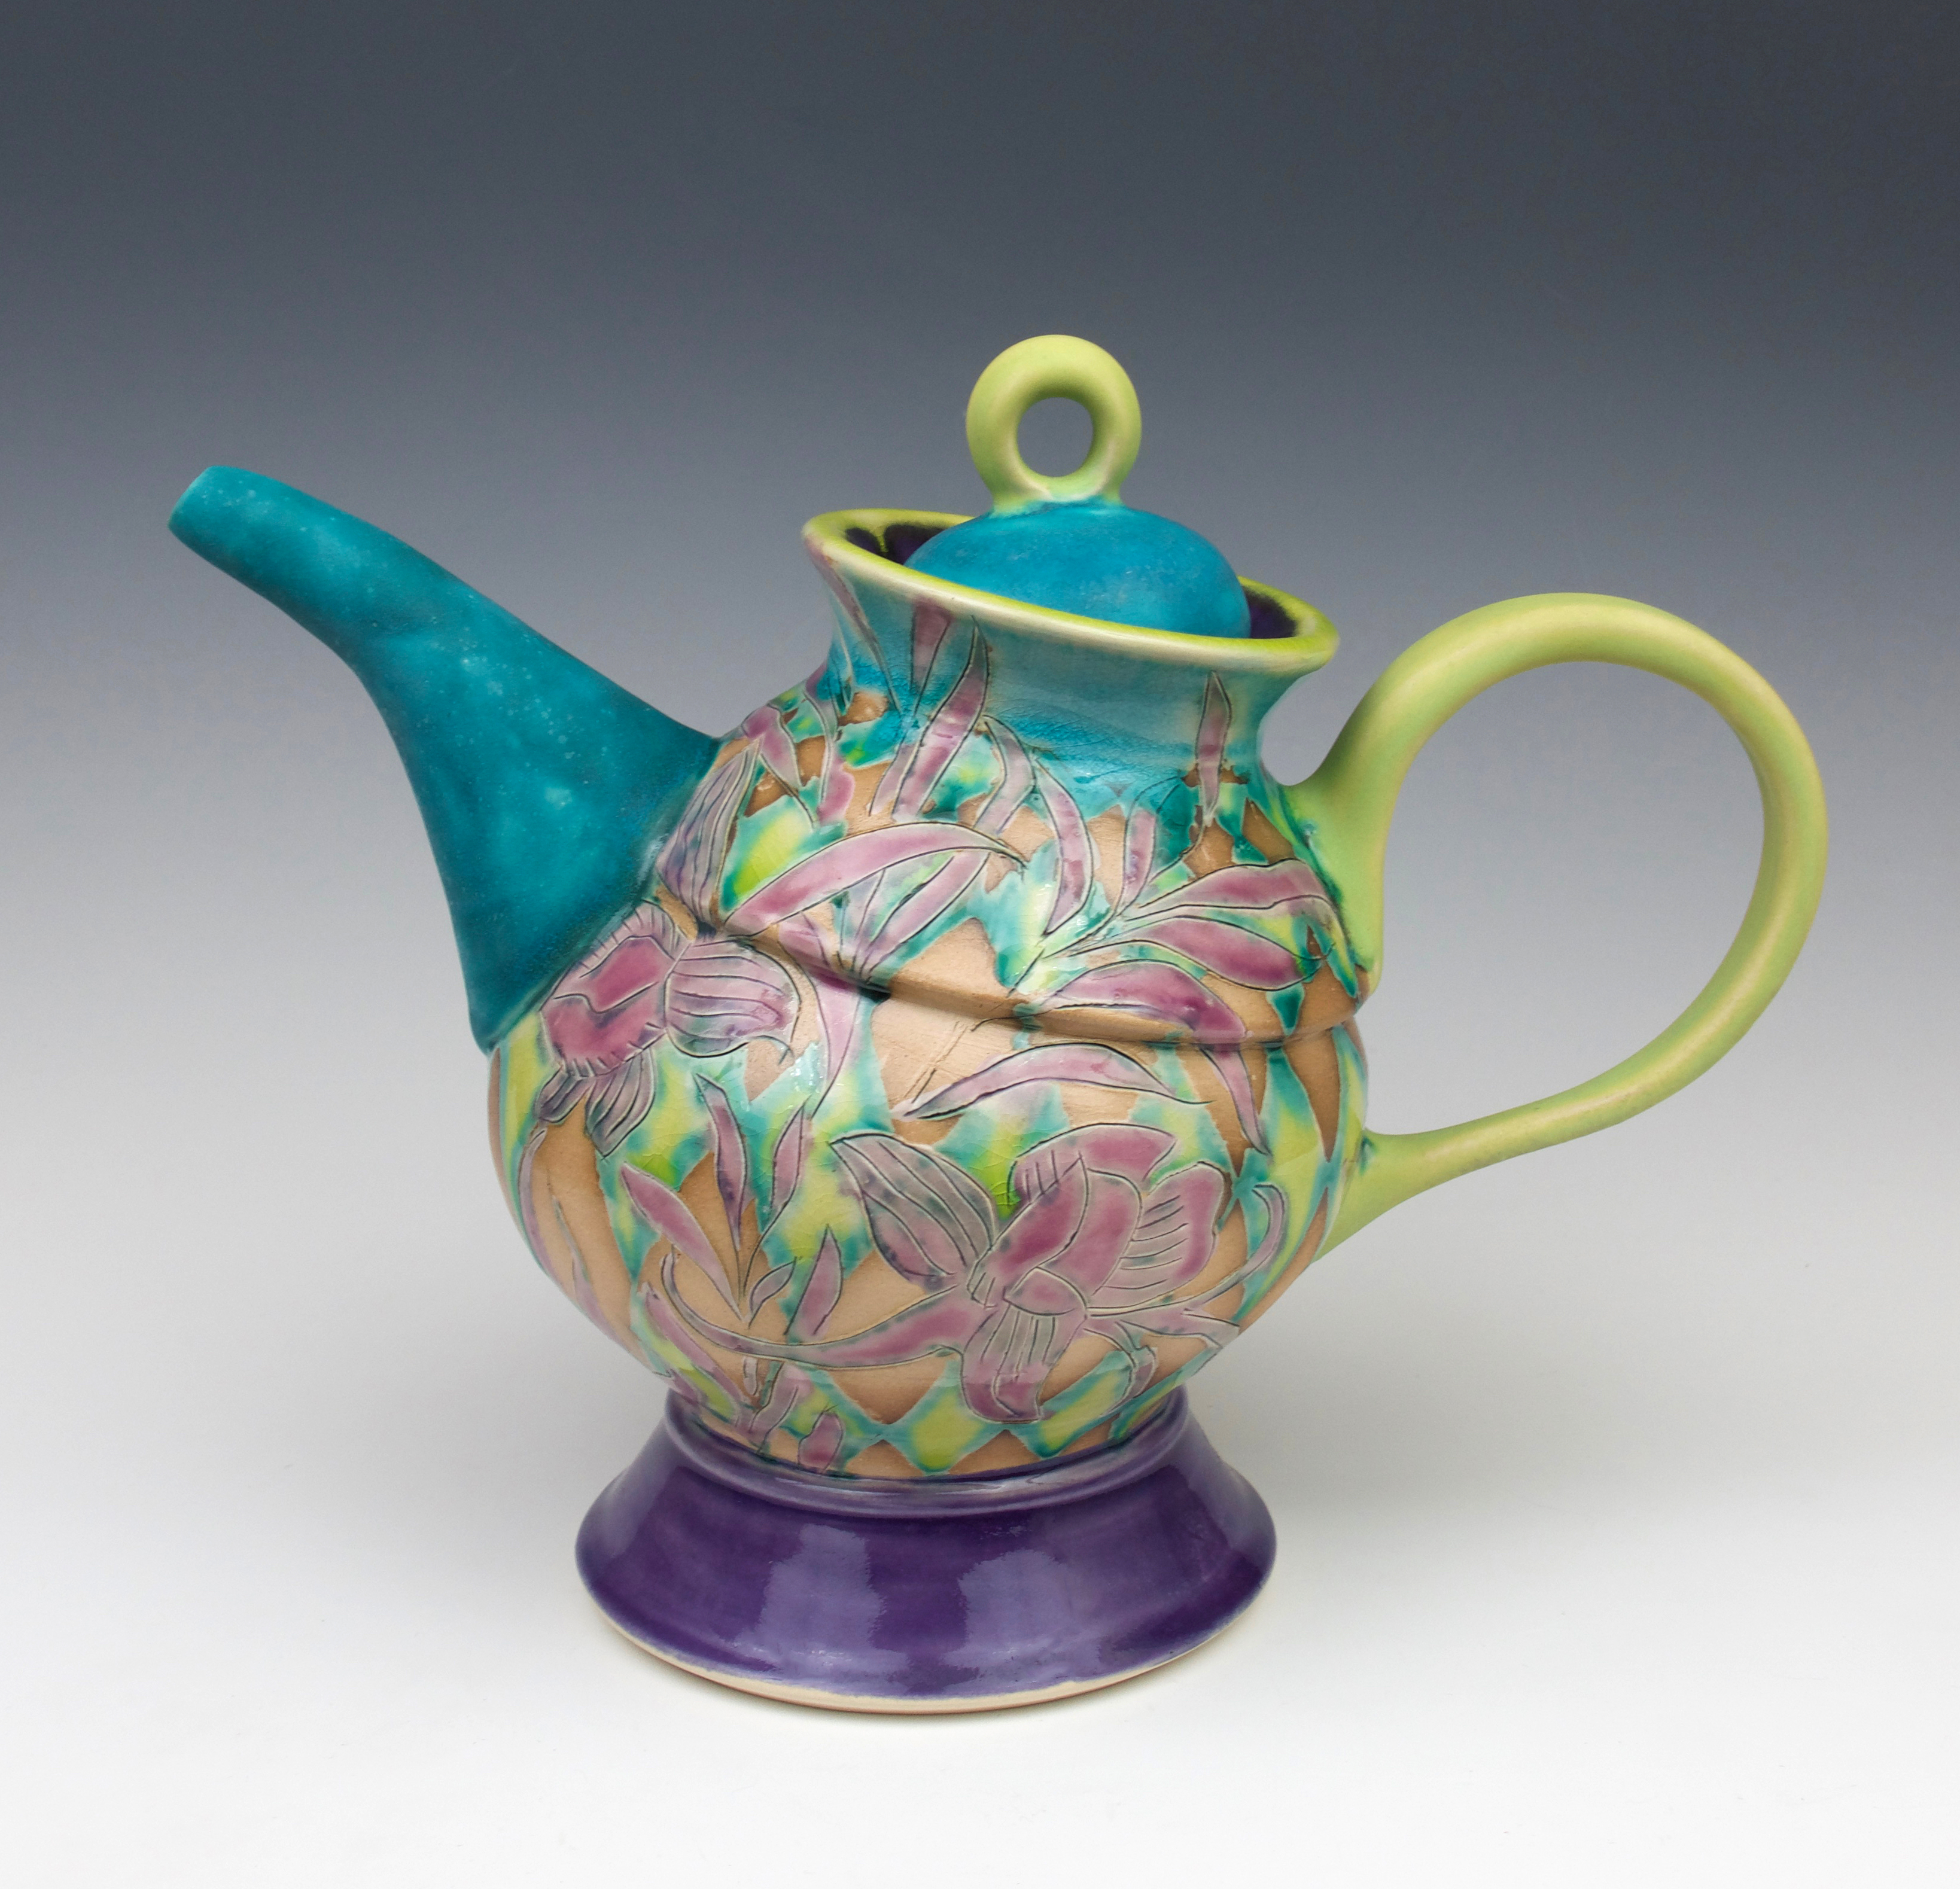 Shana Salaff, Chubby Teapot, 9 in. (23 cm) in height, porcelaneous stoneware, fired to cone 5 in oxidation